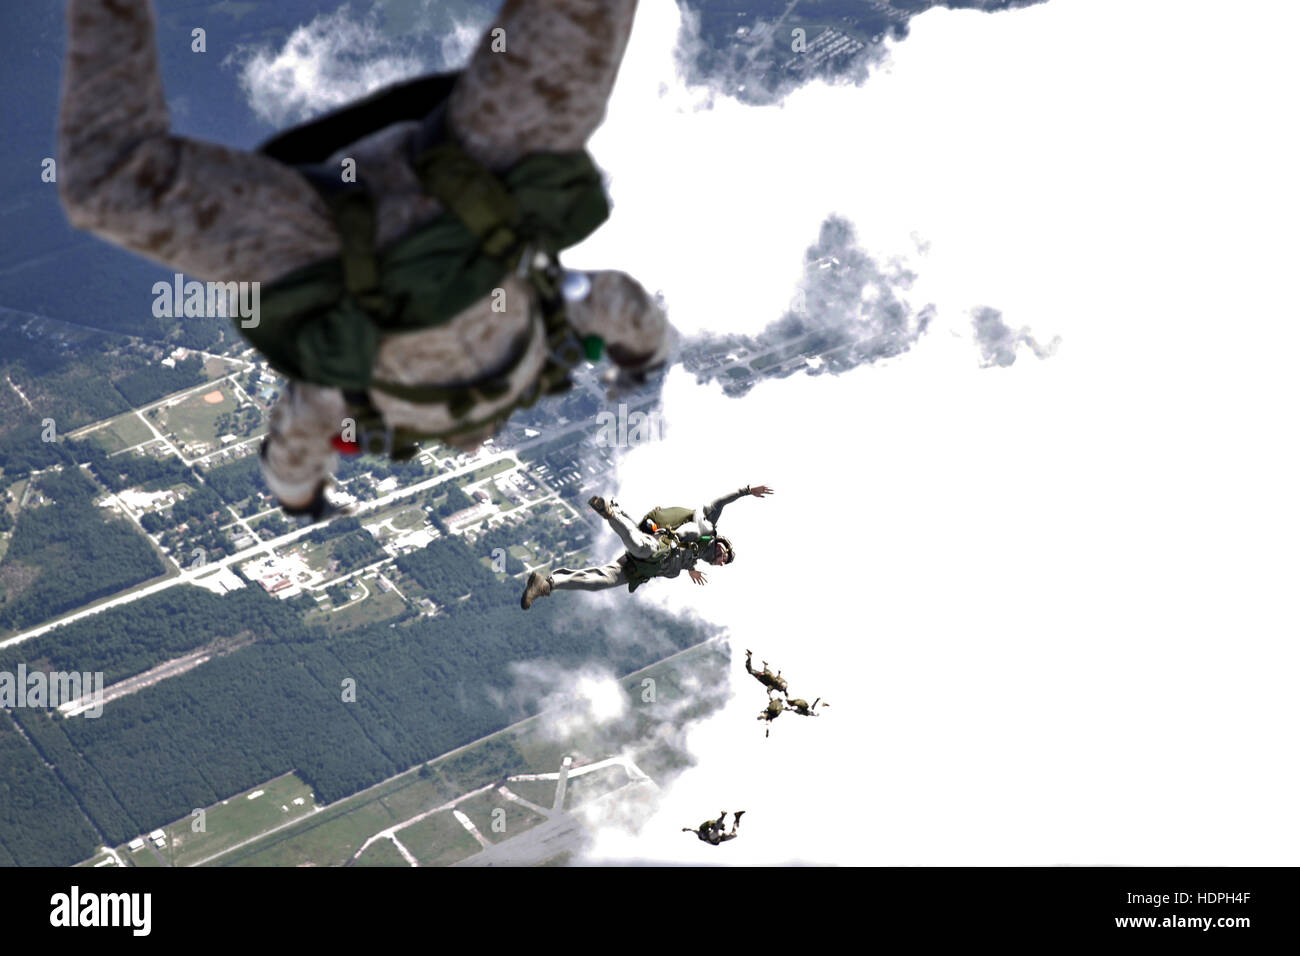 U.S. Marine soldiers conduct a free-fall jump from a Bell Boeing MV-22B Osprey tiltrotor aircraft during parachute exercises above the Marine Corps Base Camp Lejeune Drop Zone Pheasant September 1, 2015 near Jacksonville, North Carolina. Stock Photo